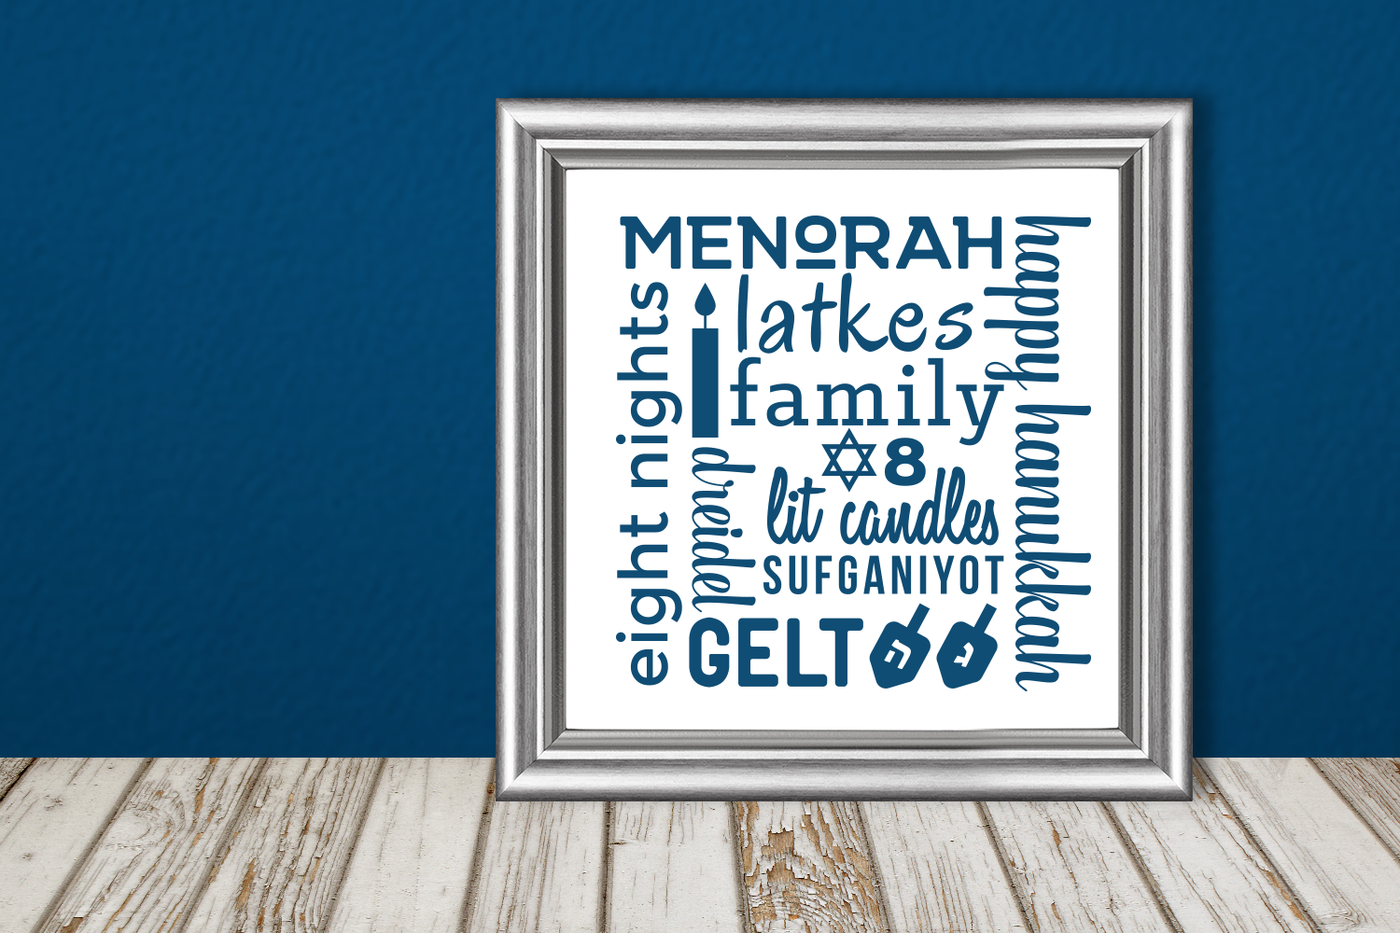 Square subway word art design featuring words and symbols related to Hanukkah.